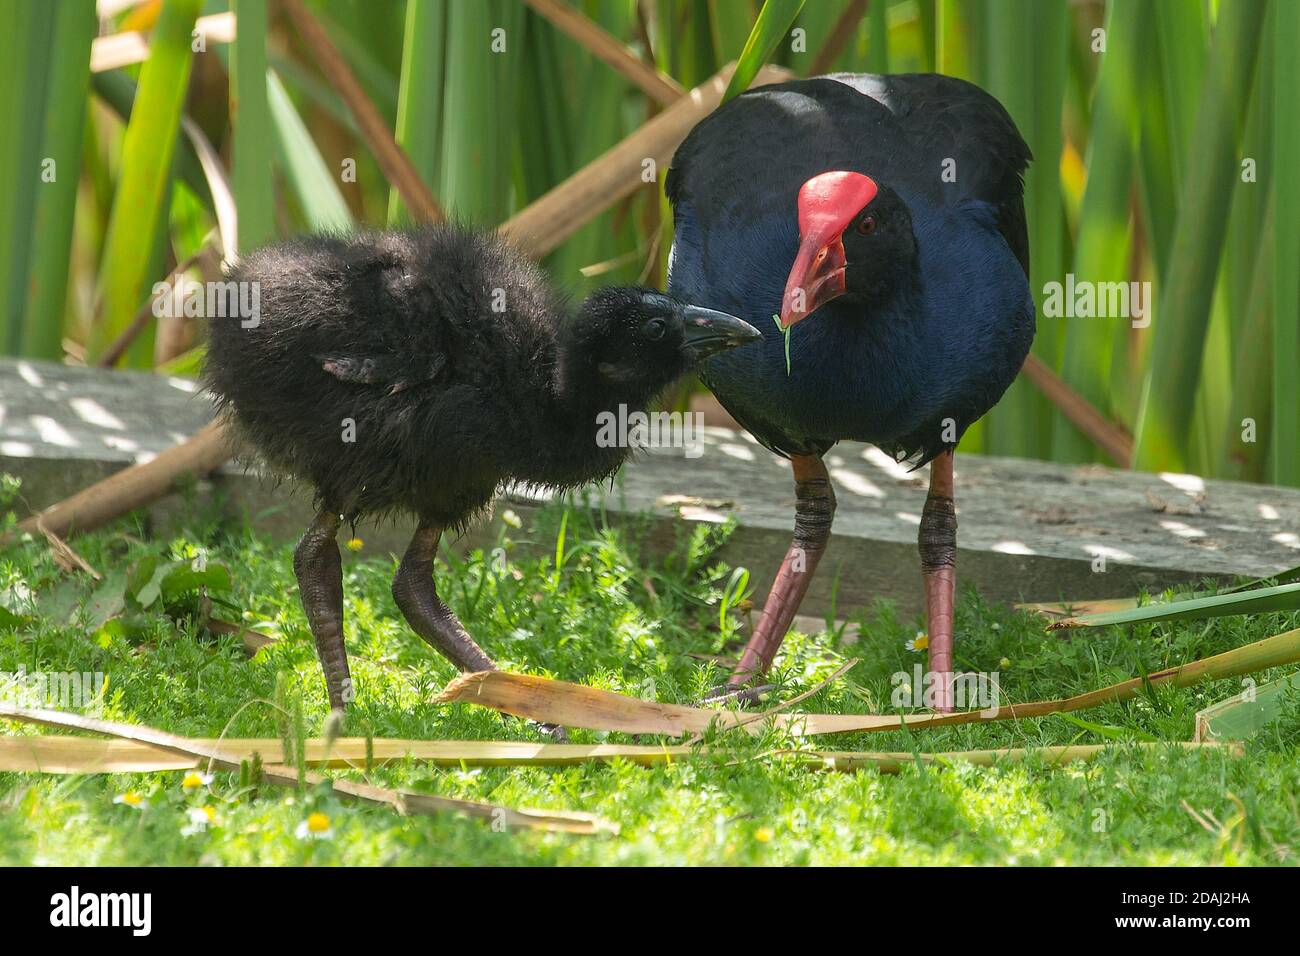 A pukeko, or Australasian swamphen, feeding grass to its fluffy chick. Photographed in New Zealand Stock Photo